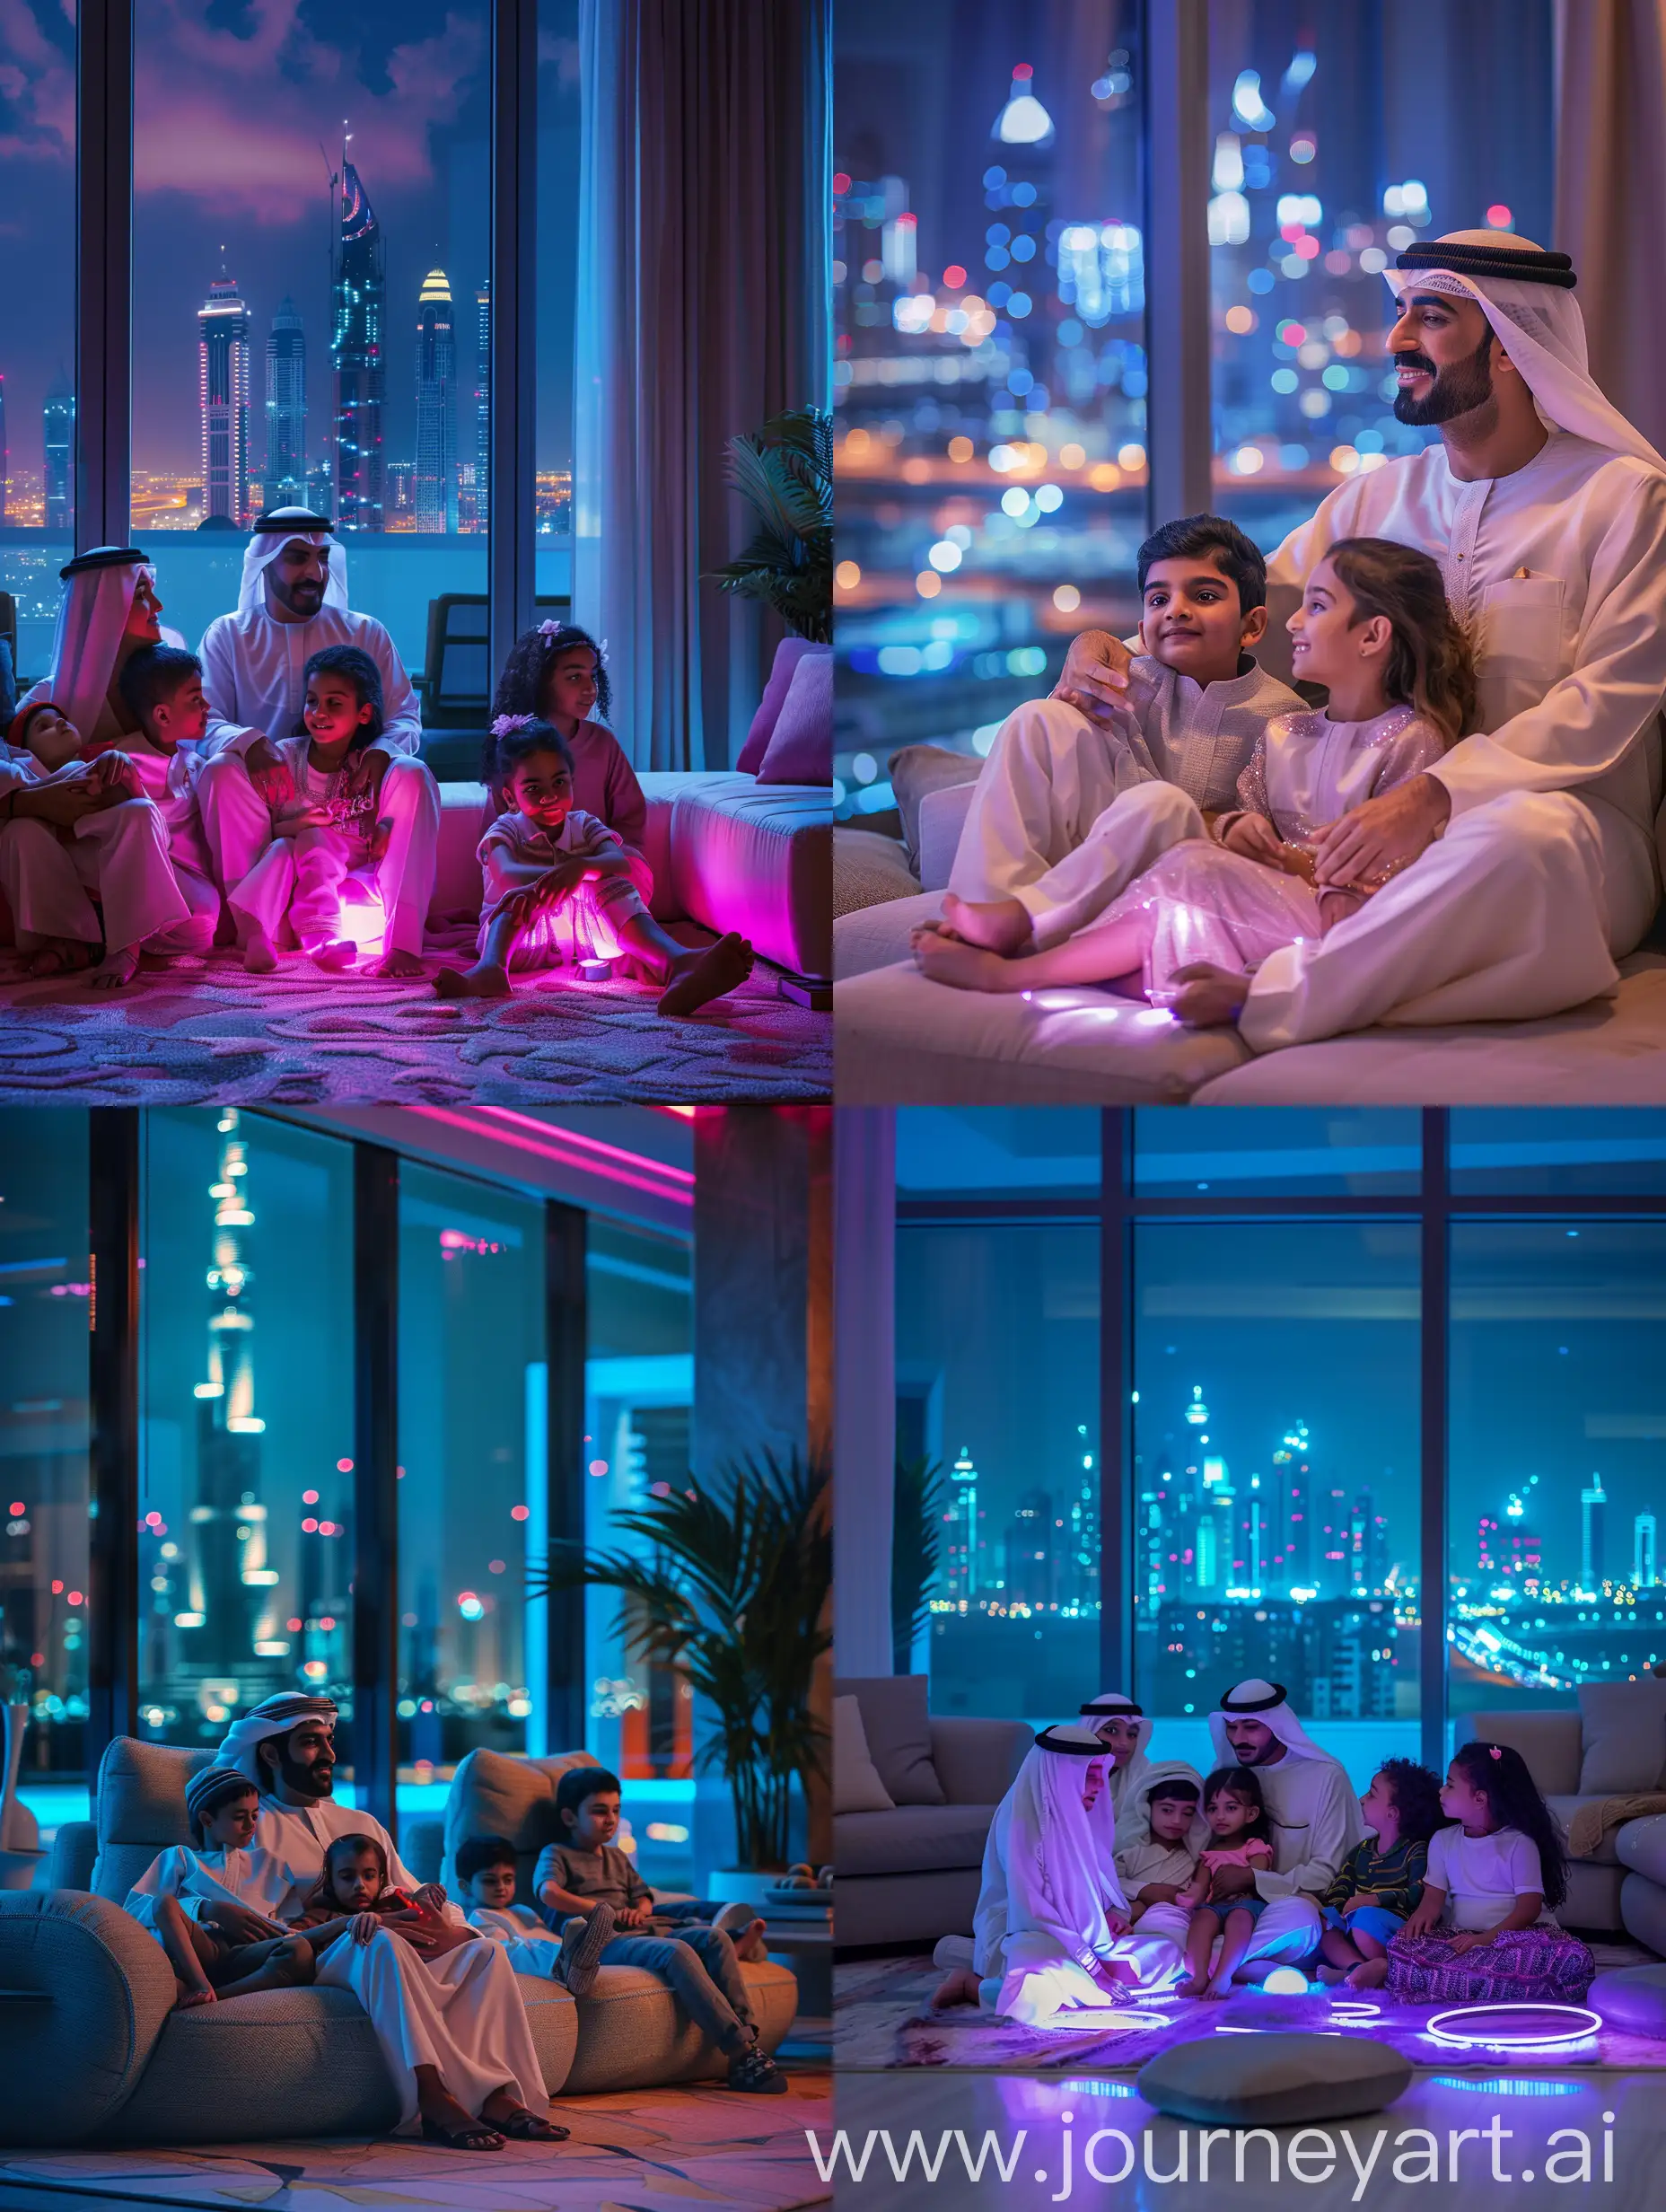 Arabic-Sheikh-Relaxing-with-Children-in-Modern-Luxury-Villa-with-Dubai-Cityscape-View-at-Night